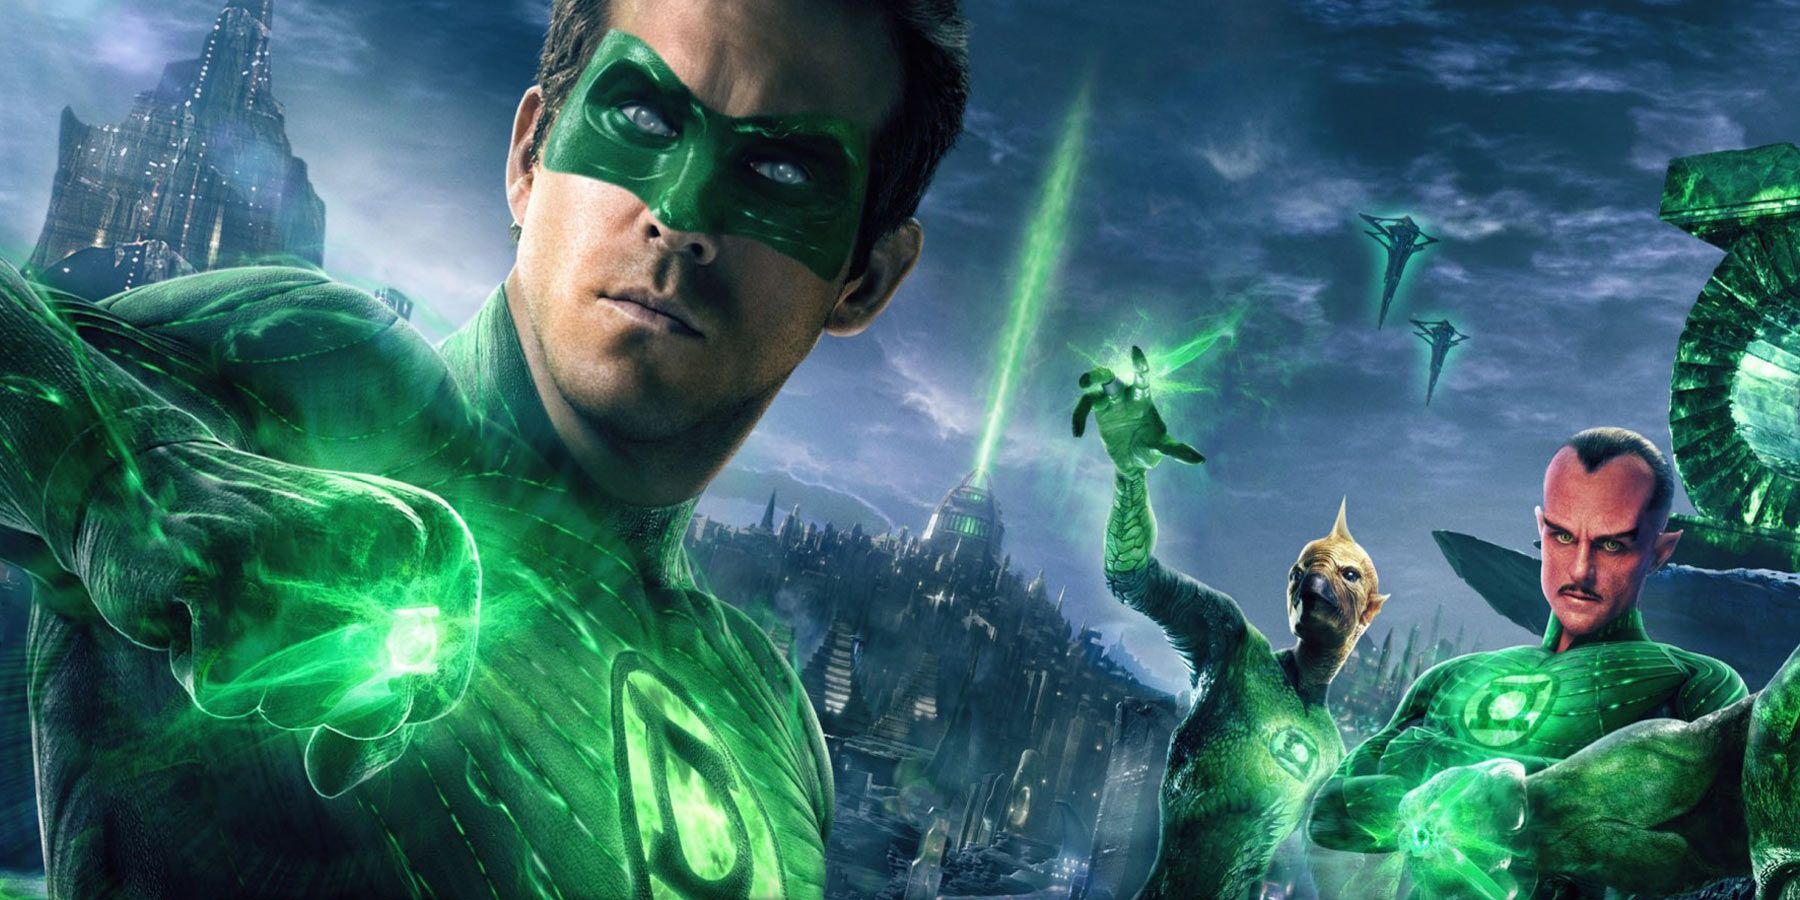 An image showing various Green Lanterns from the  2011 film, including Hal Jordan, Sinestro and Tomar-Re.